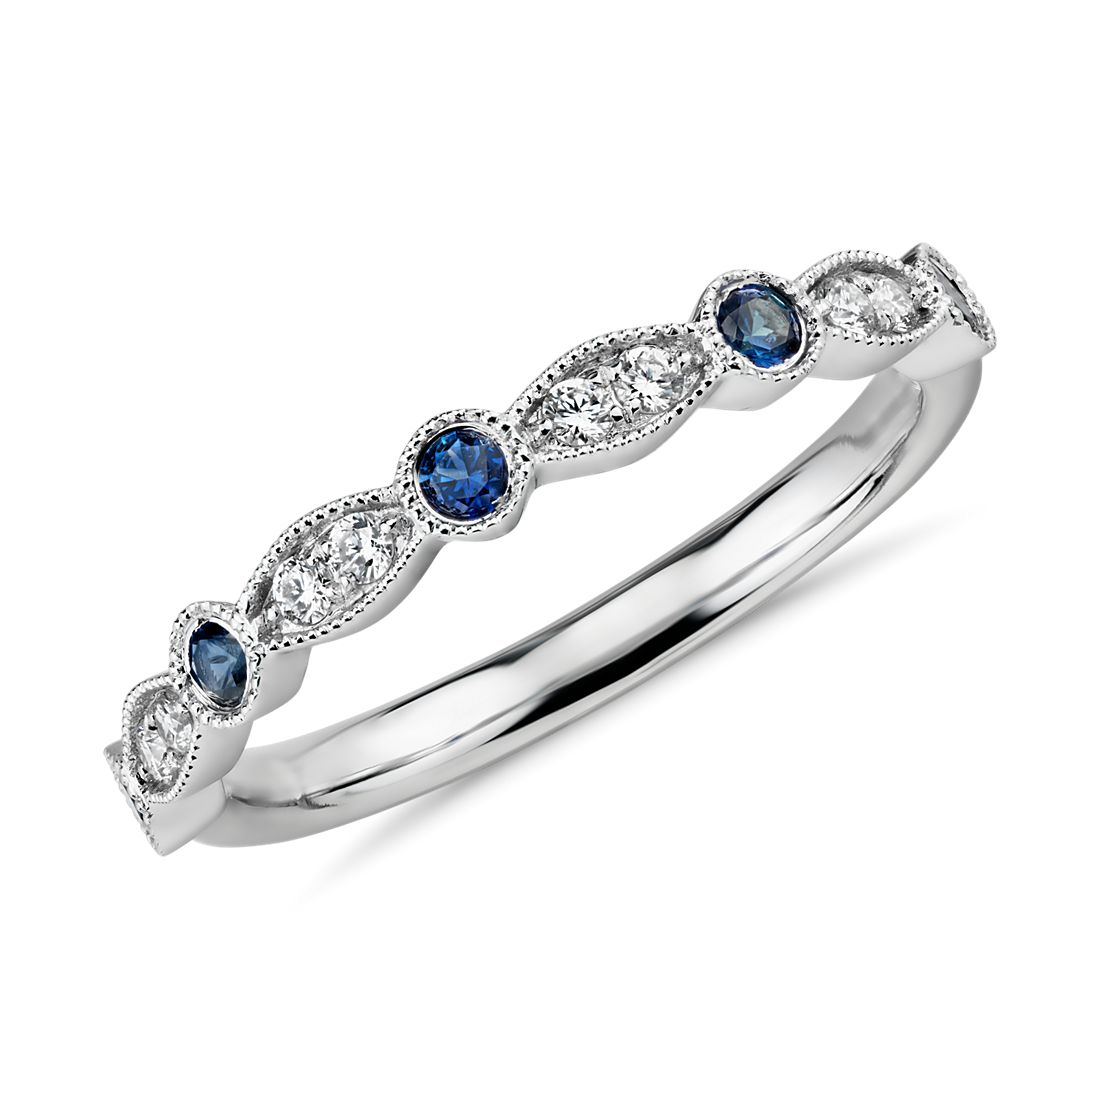 Details about   10k White Gold Marquise Sapphire And Diamond Ring 